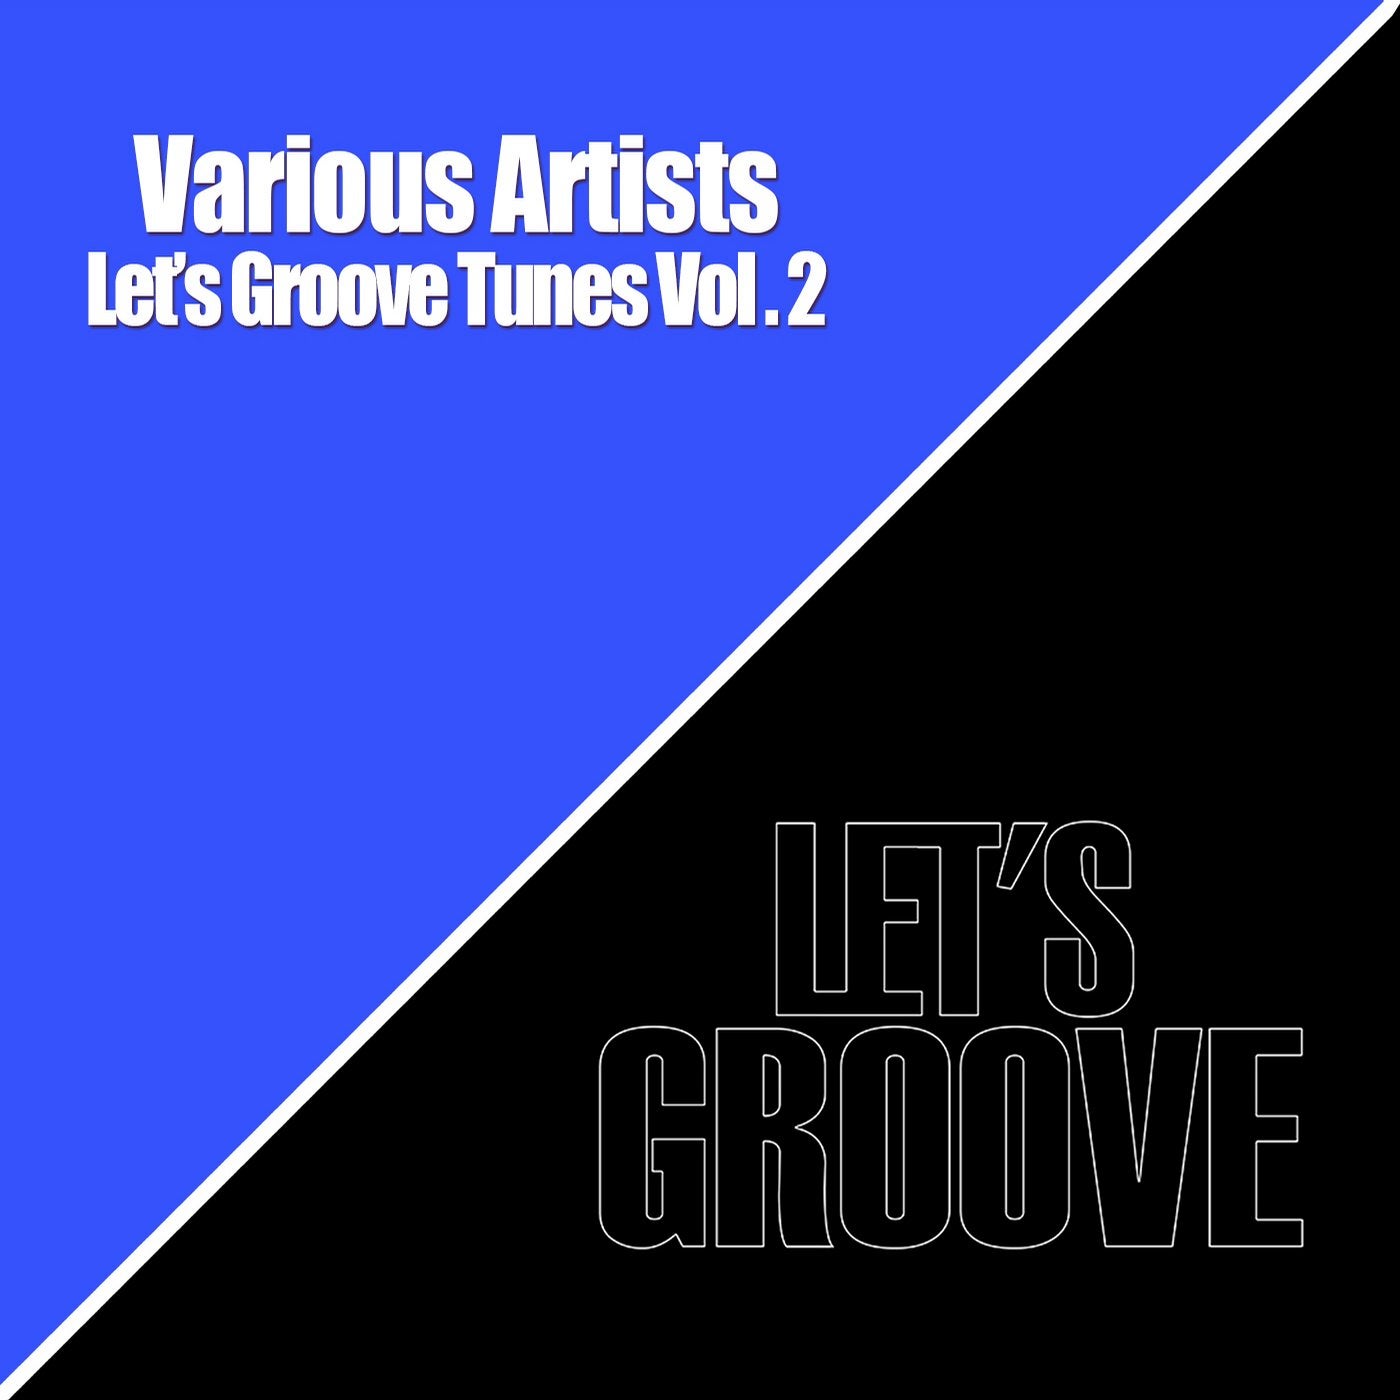 Let's Groove Tunes Vol. 2